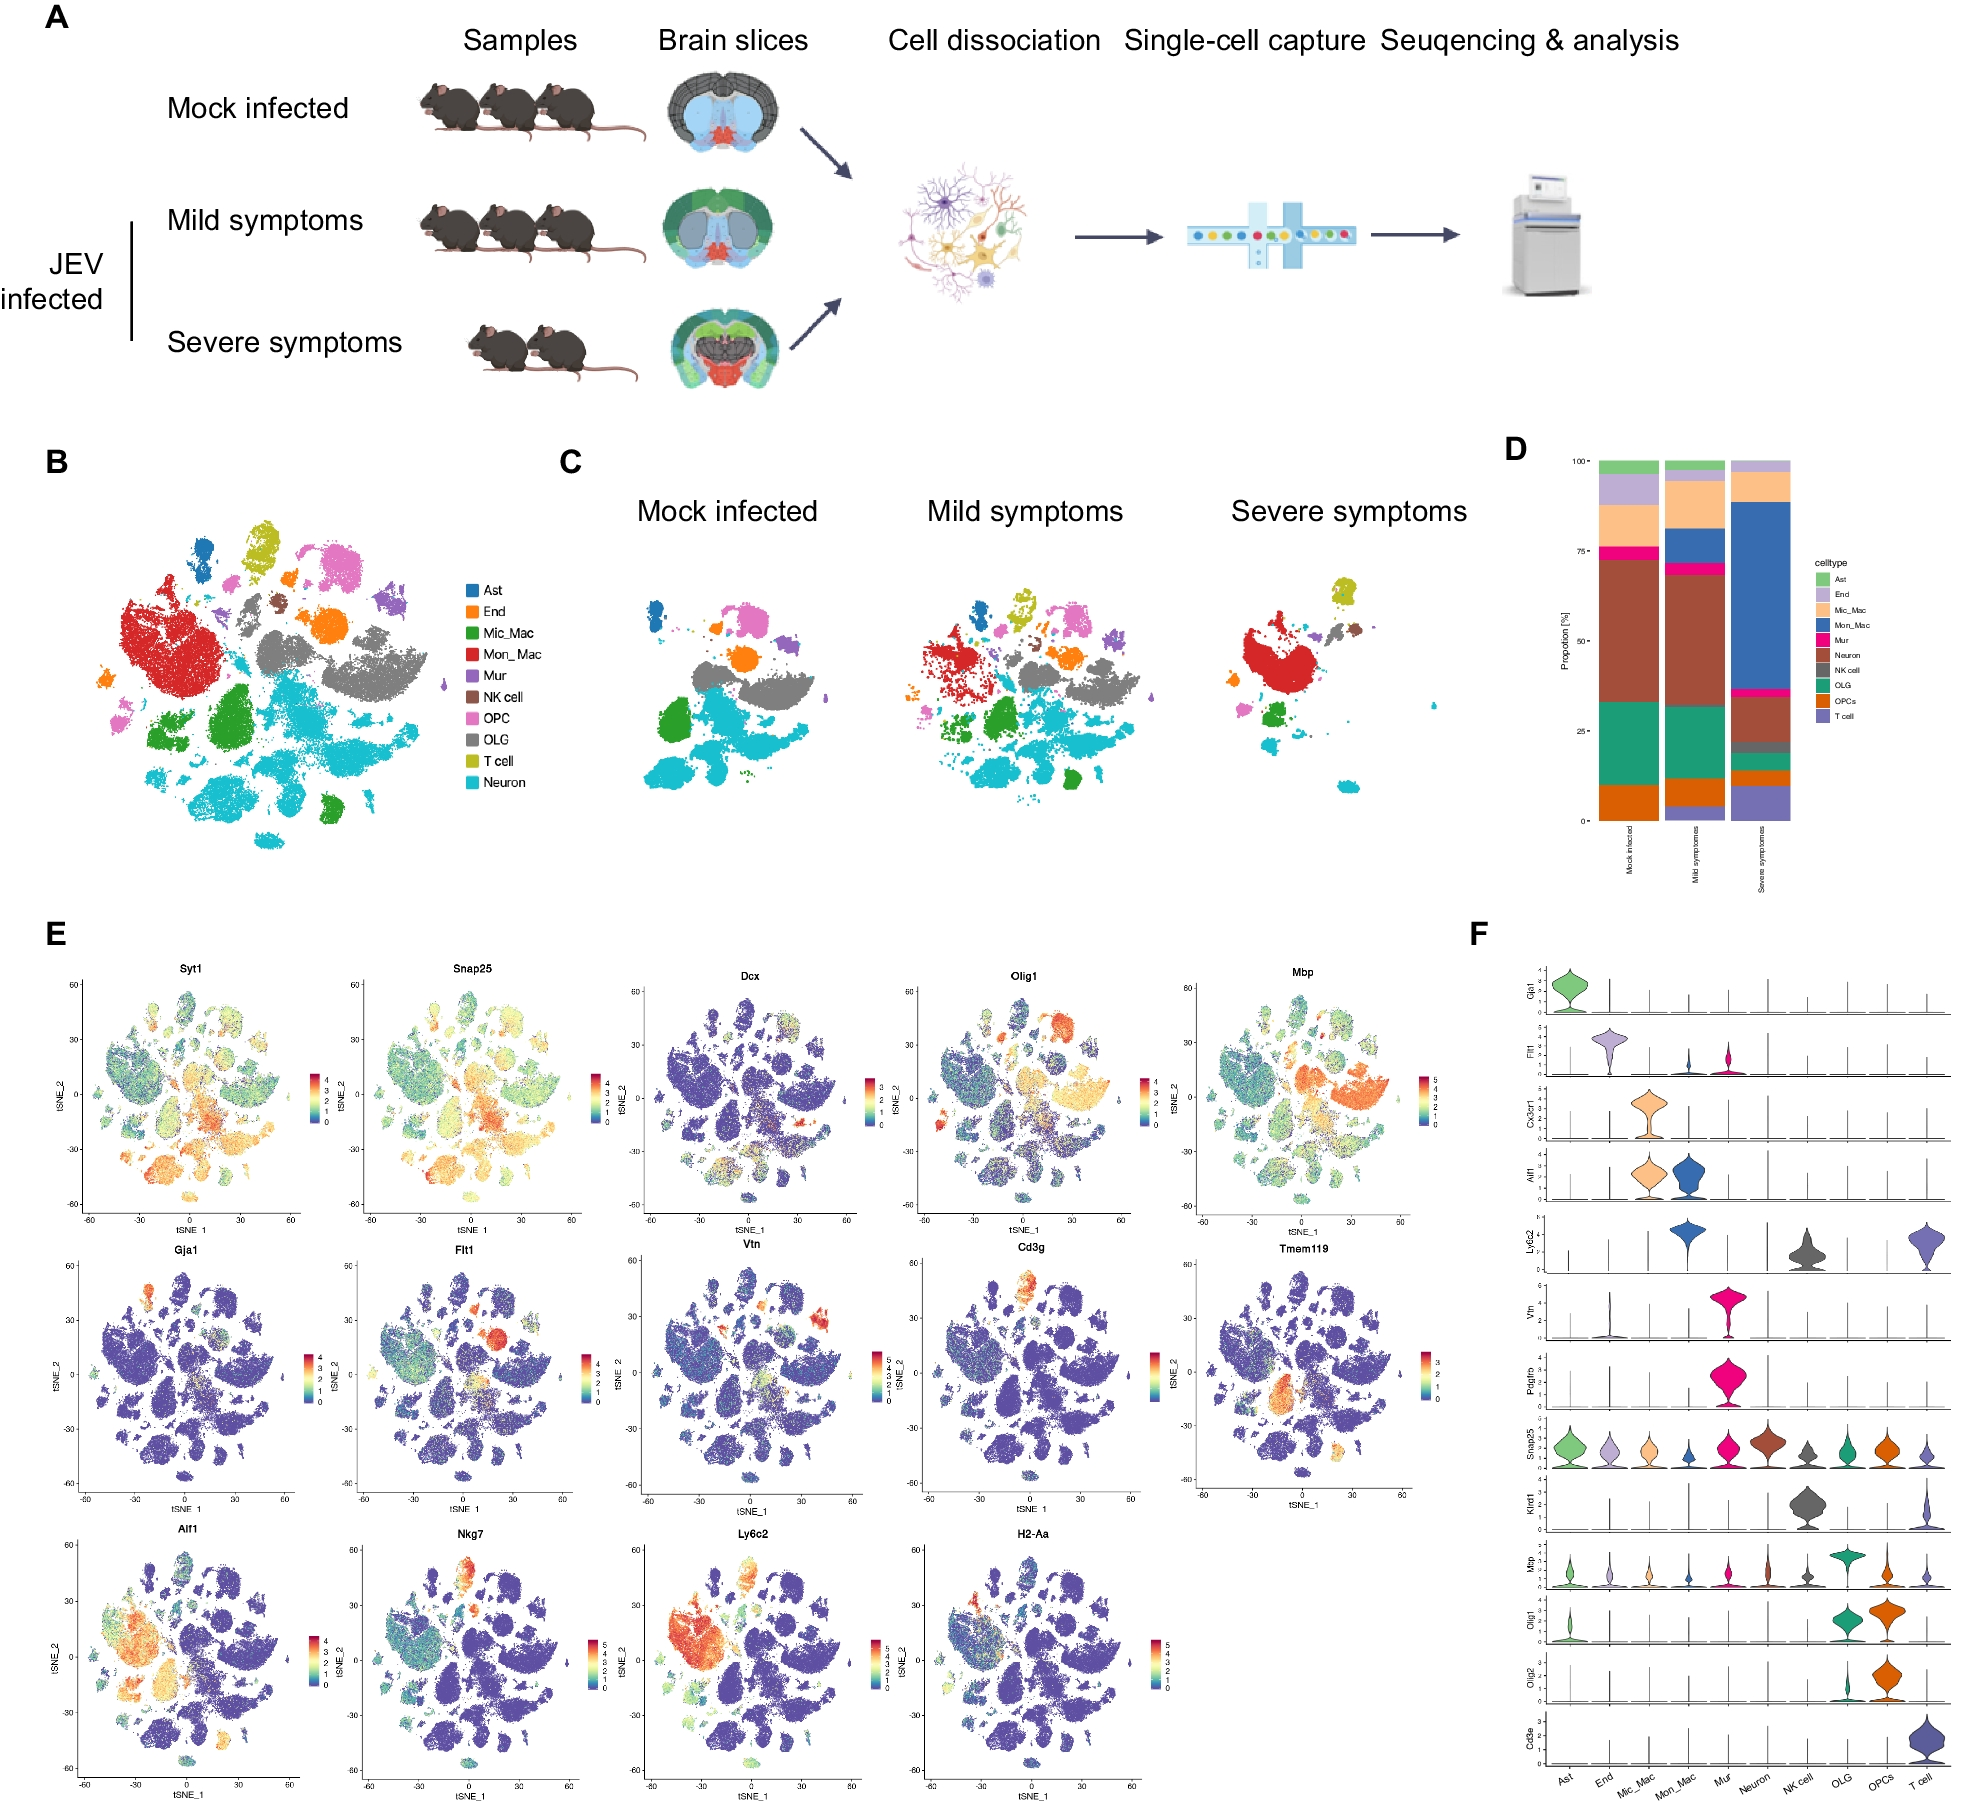 Single-cell RNA sequencing reveals the immune features and viral tropism in the central nervous system of mice infected with Japanese encephalitis virus